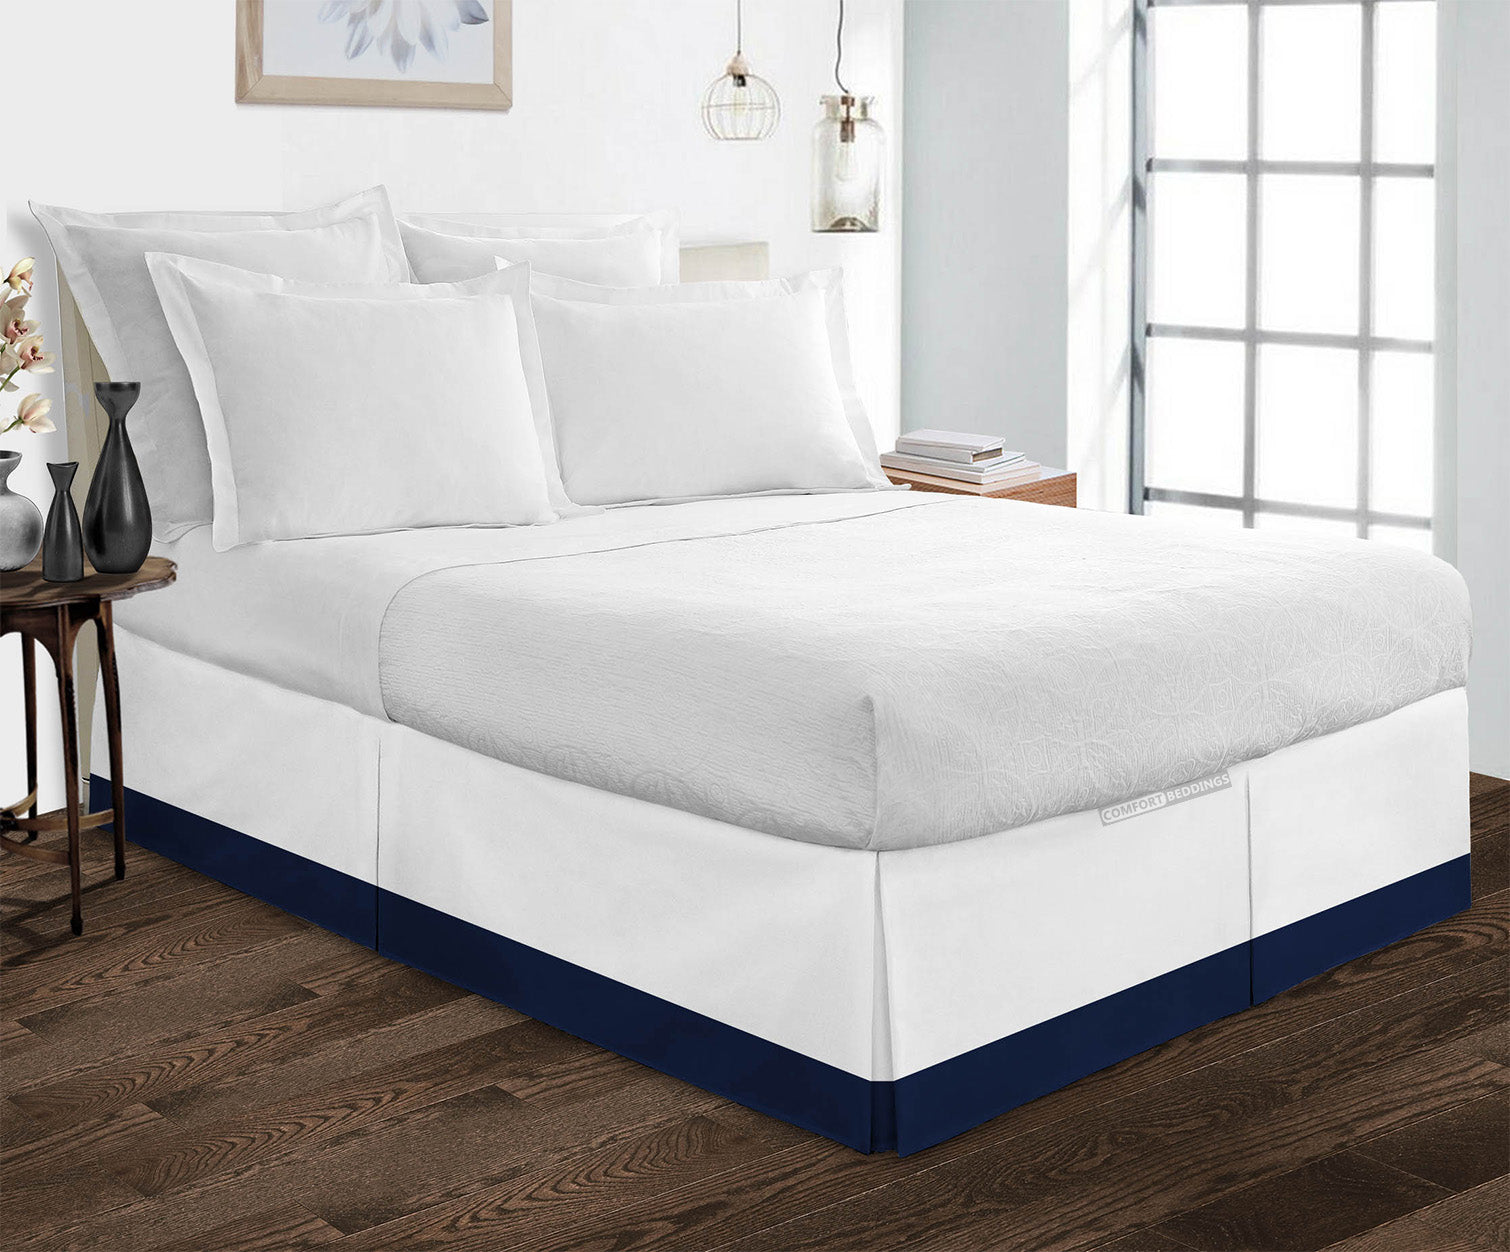 Luxury navy blue two tone bed skirt